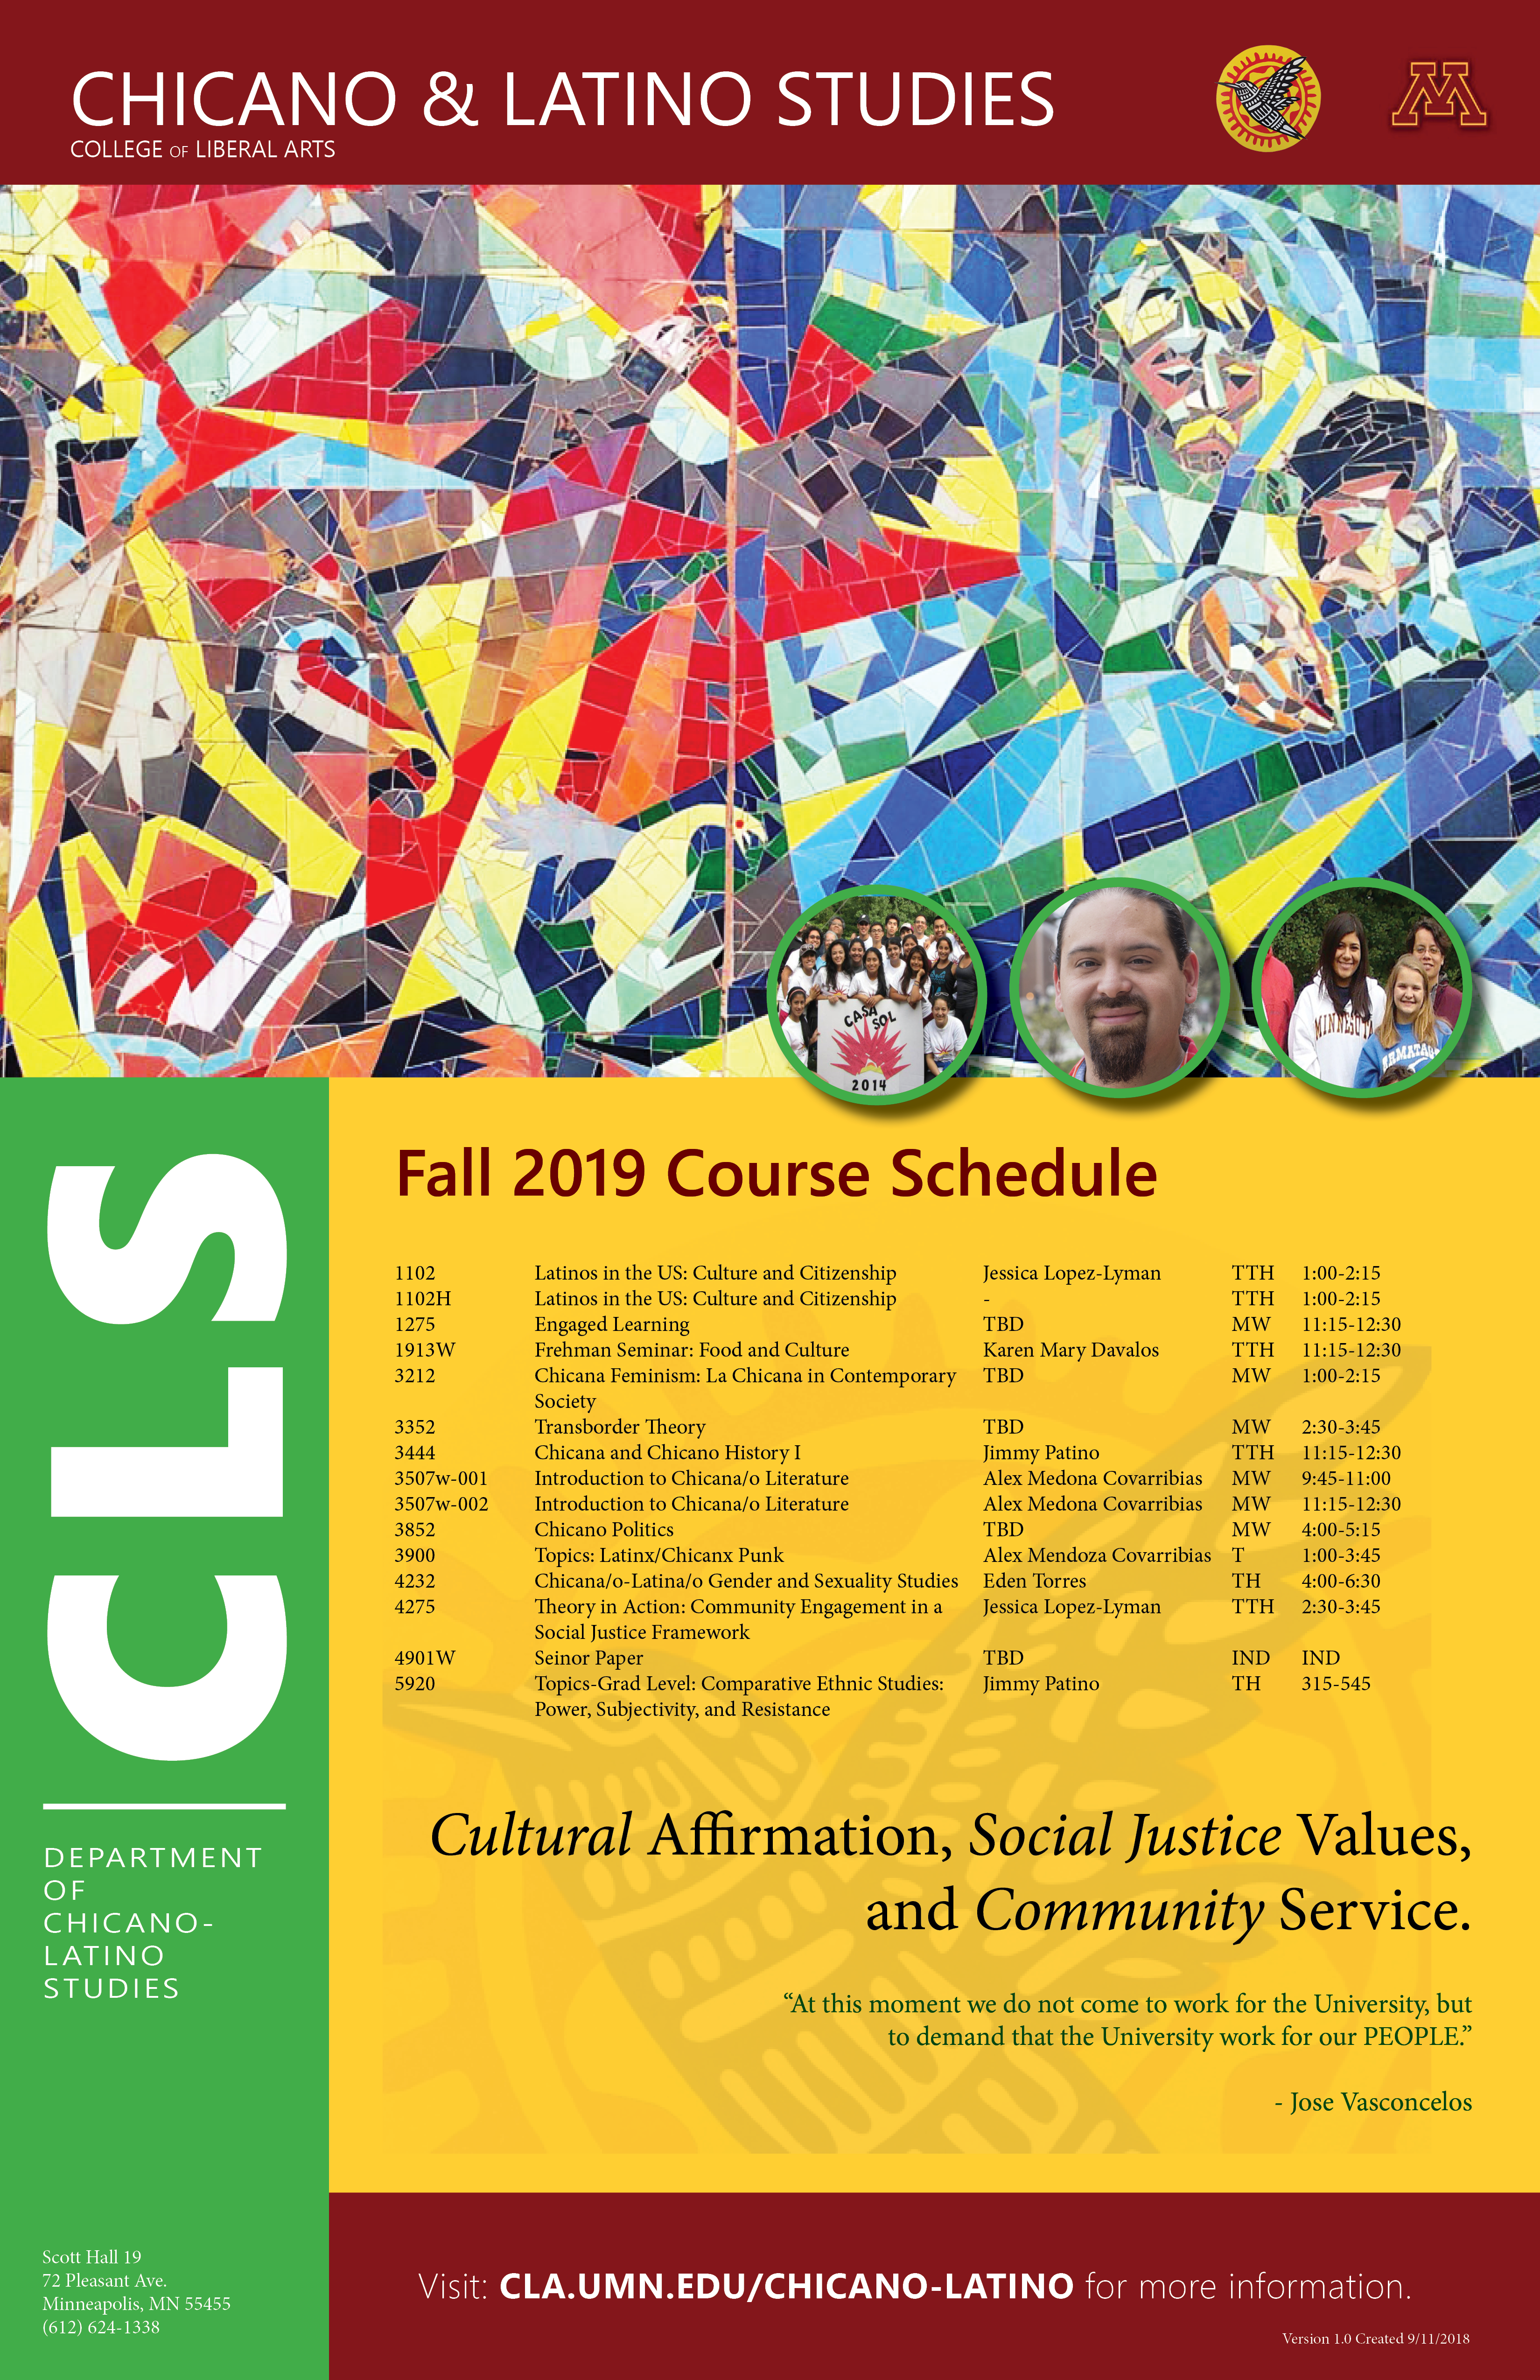 Fall 2019 CLS Course Schedule